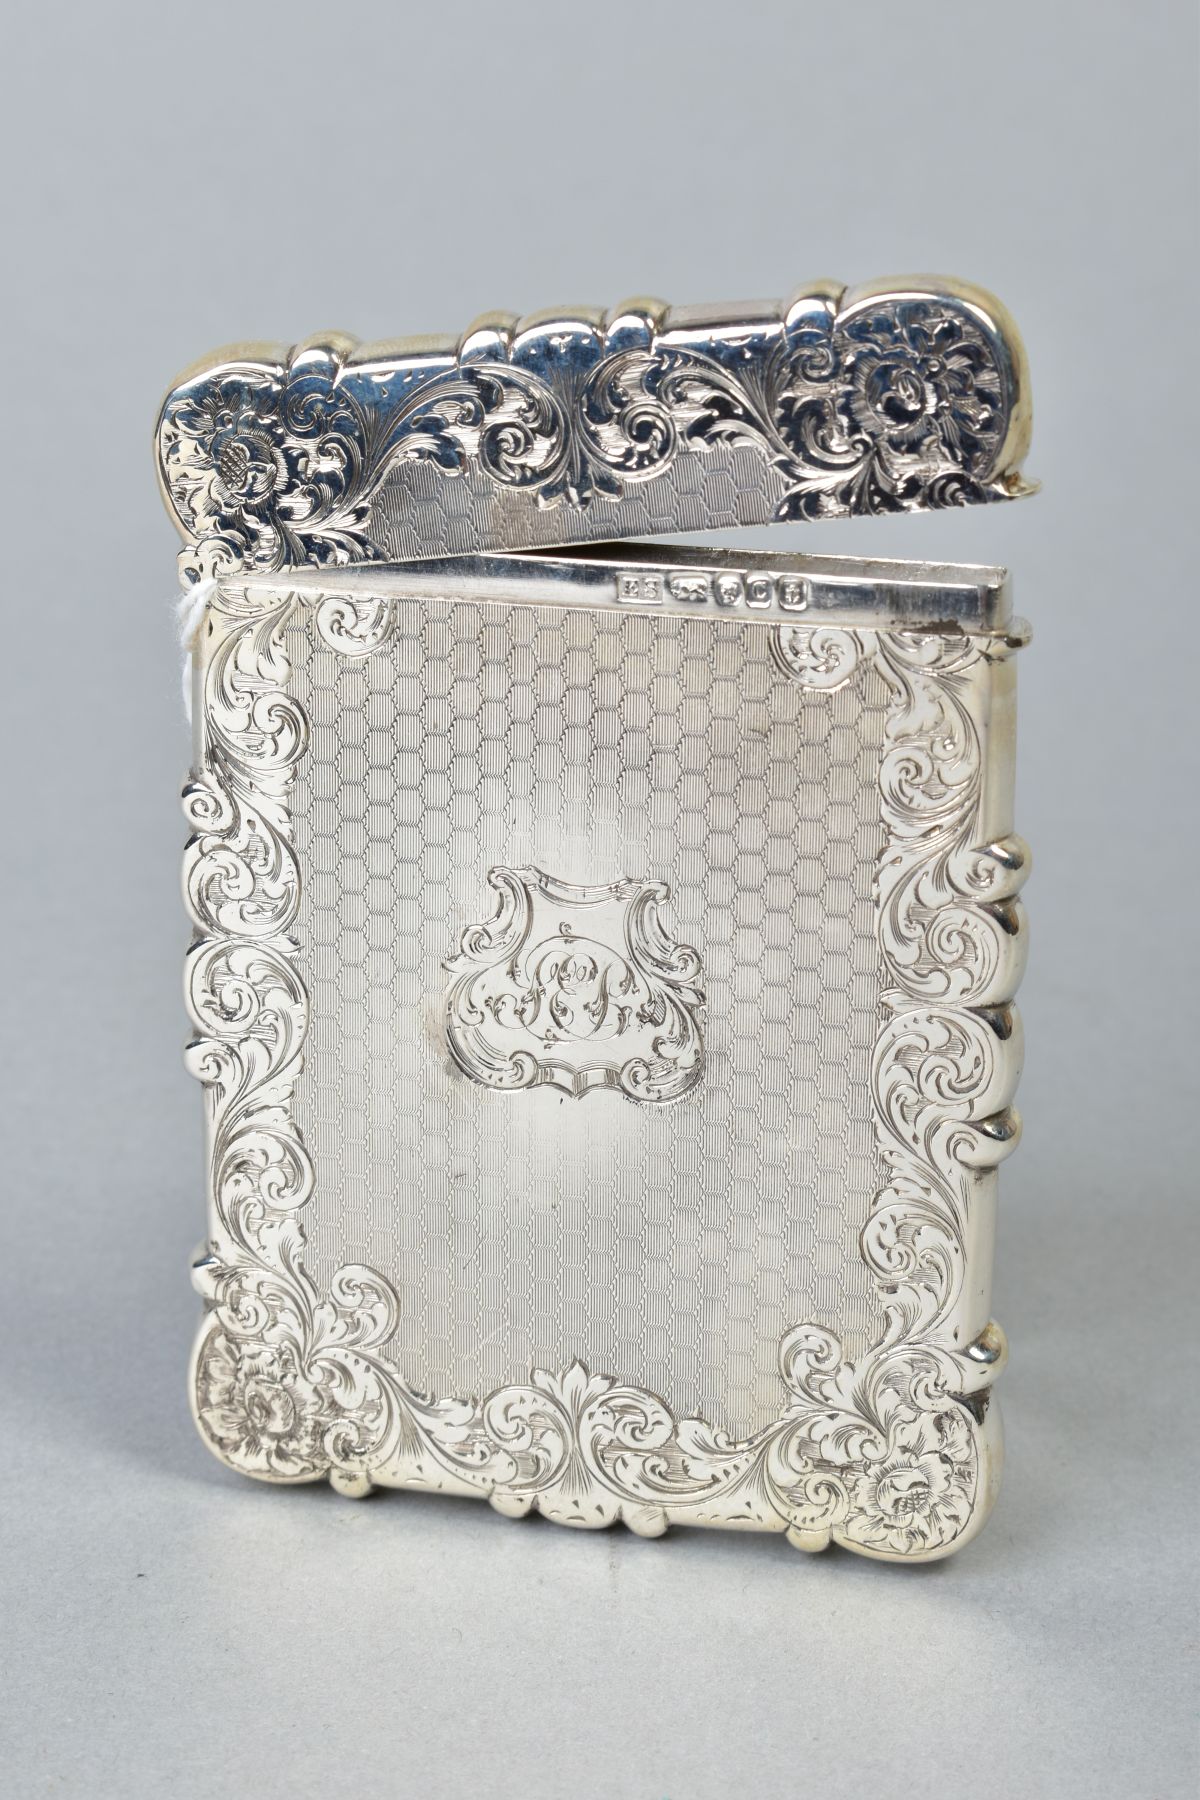 A MID VICTORIAN SILVER CARD CASE OF WAVY RECTANGULAR OUTLINE, foliate engraved and engine turned